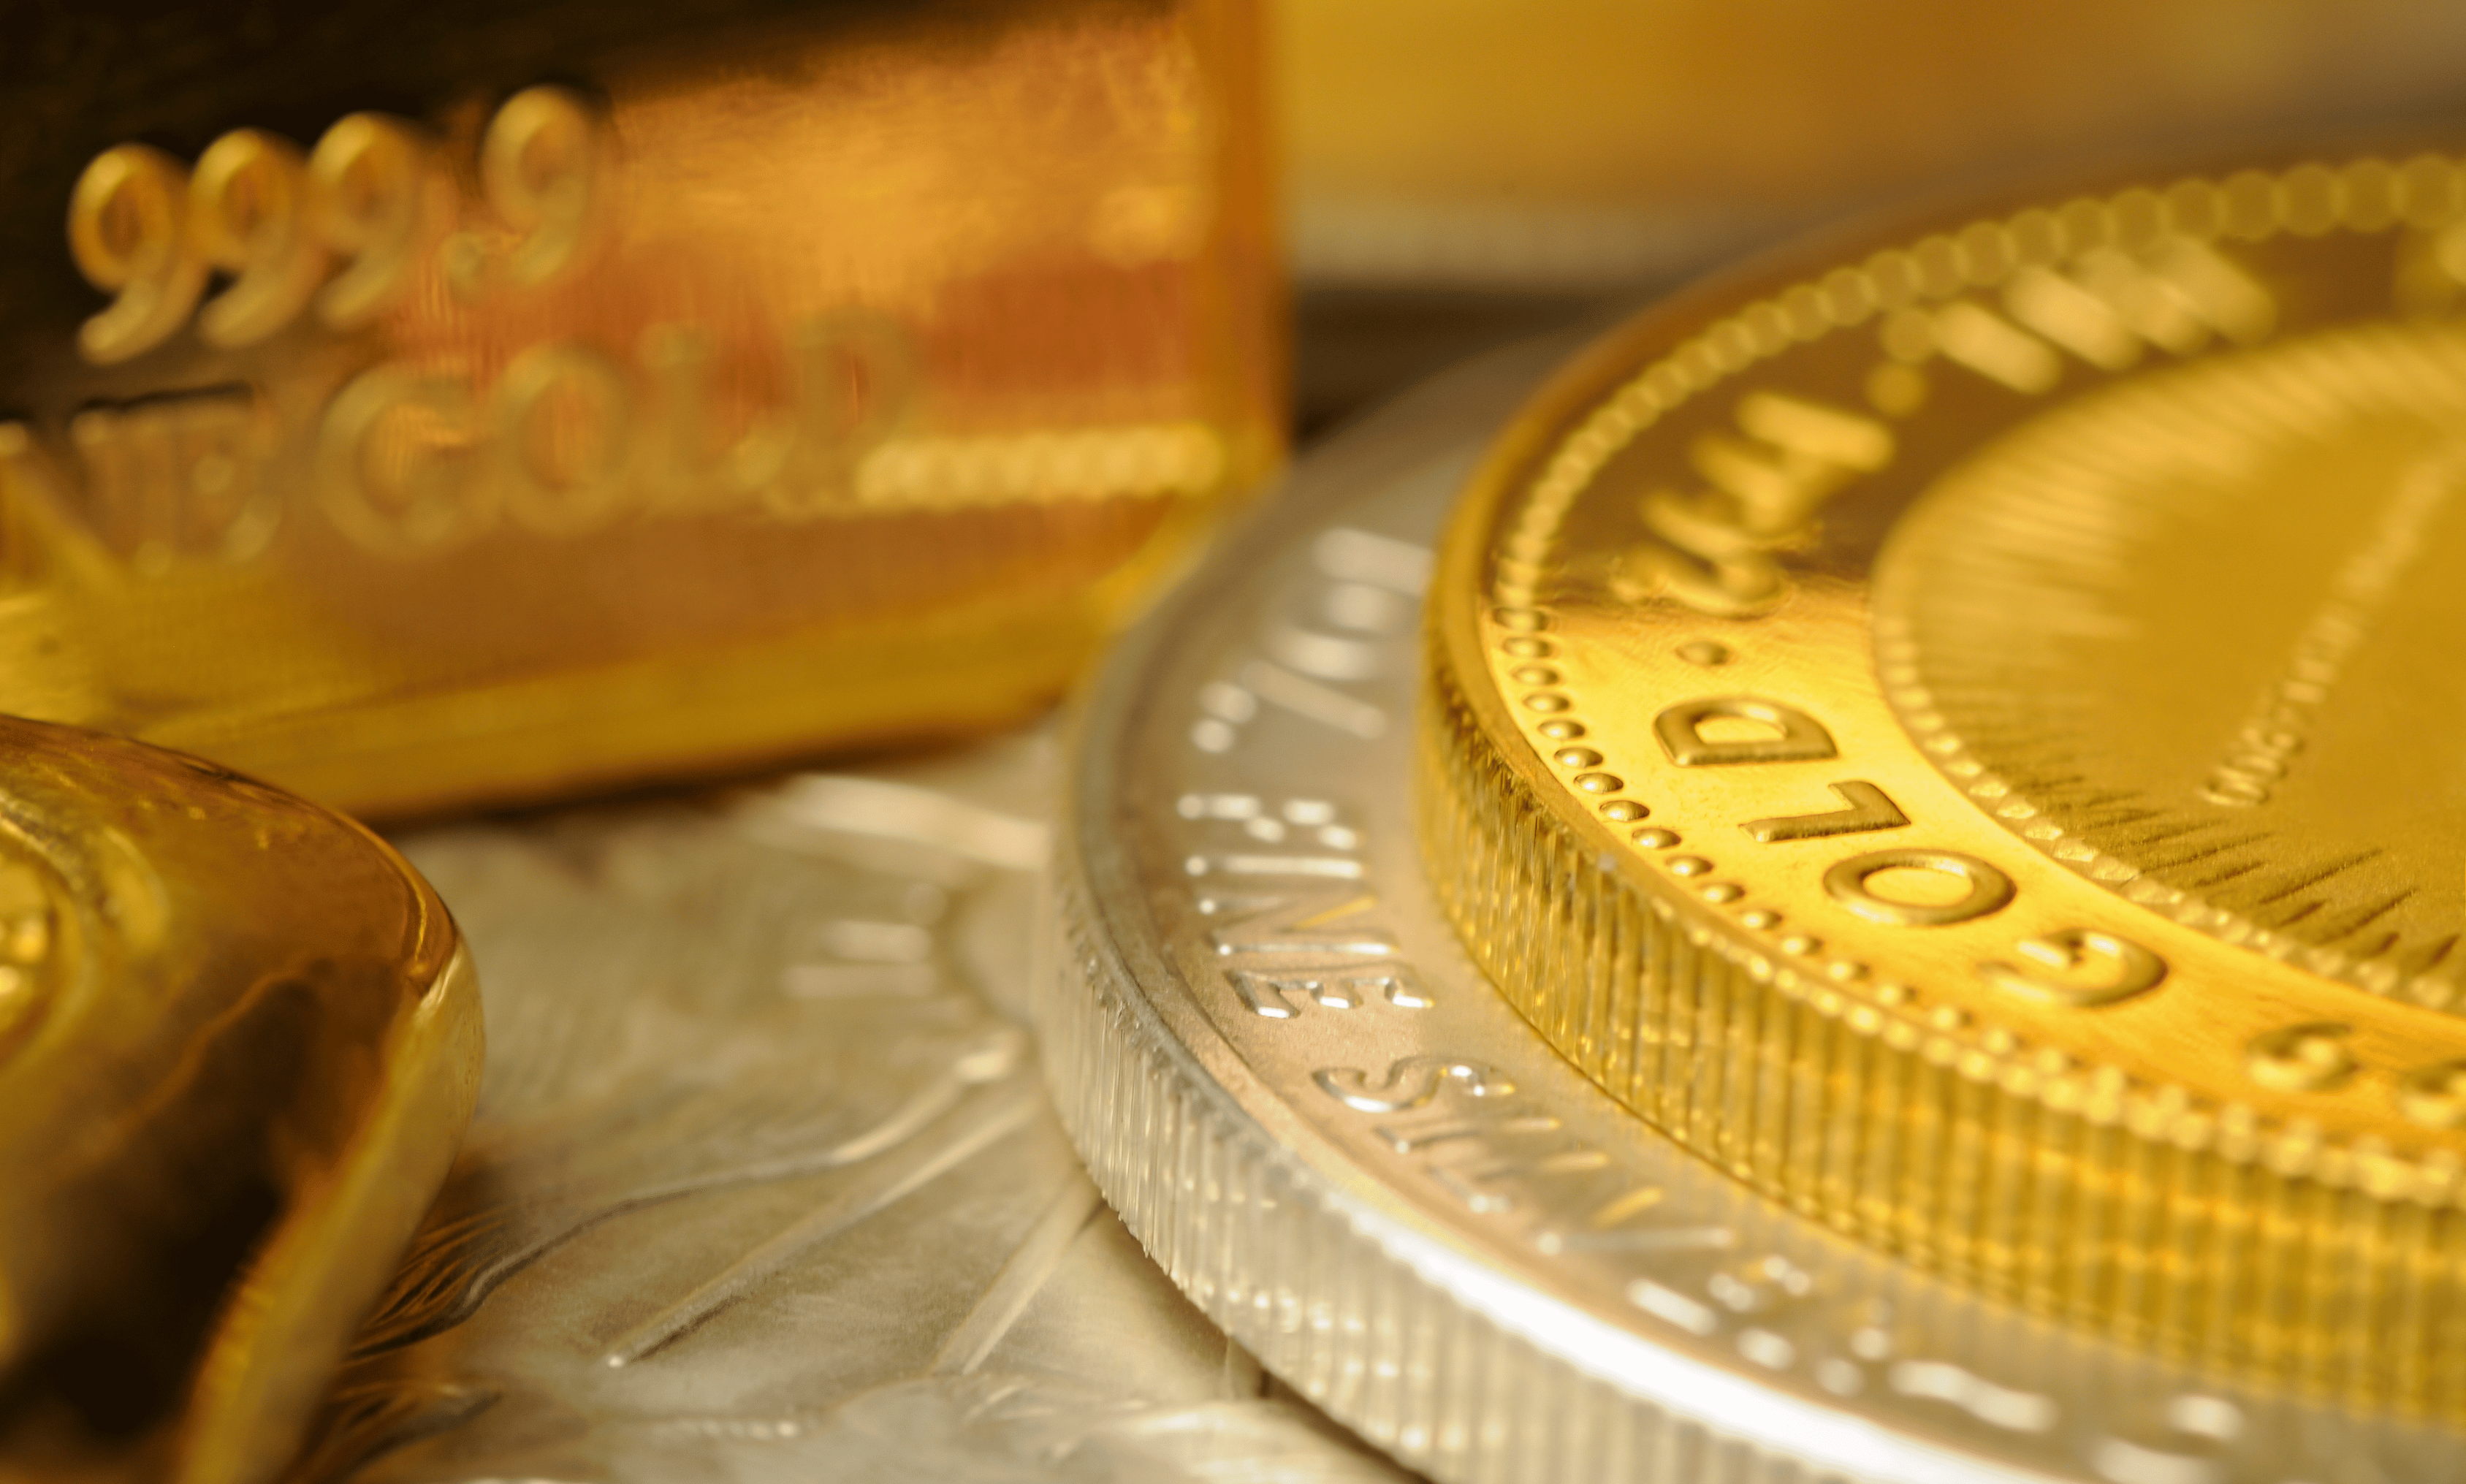 exchange traded fund, electronics and industrial products, gold coins